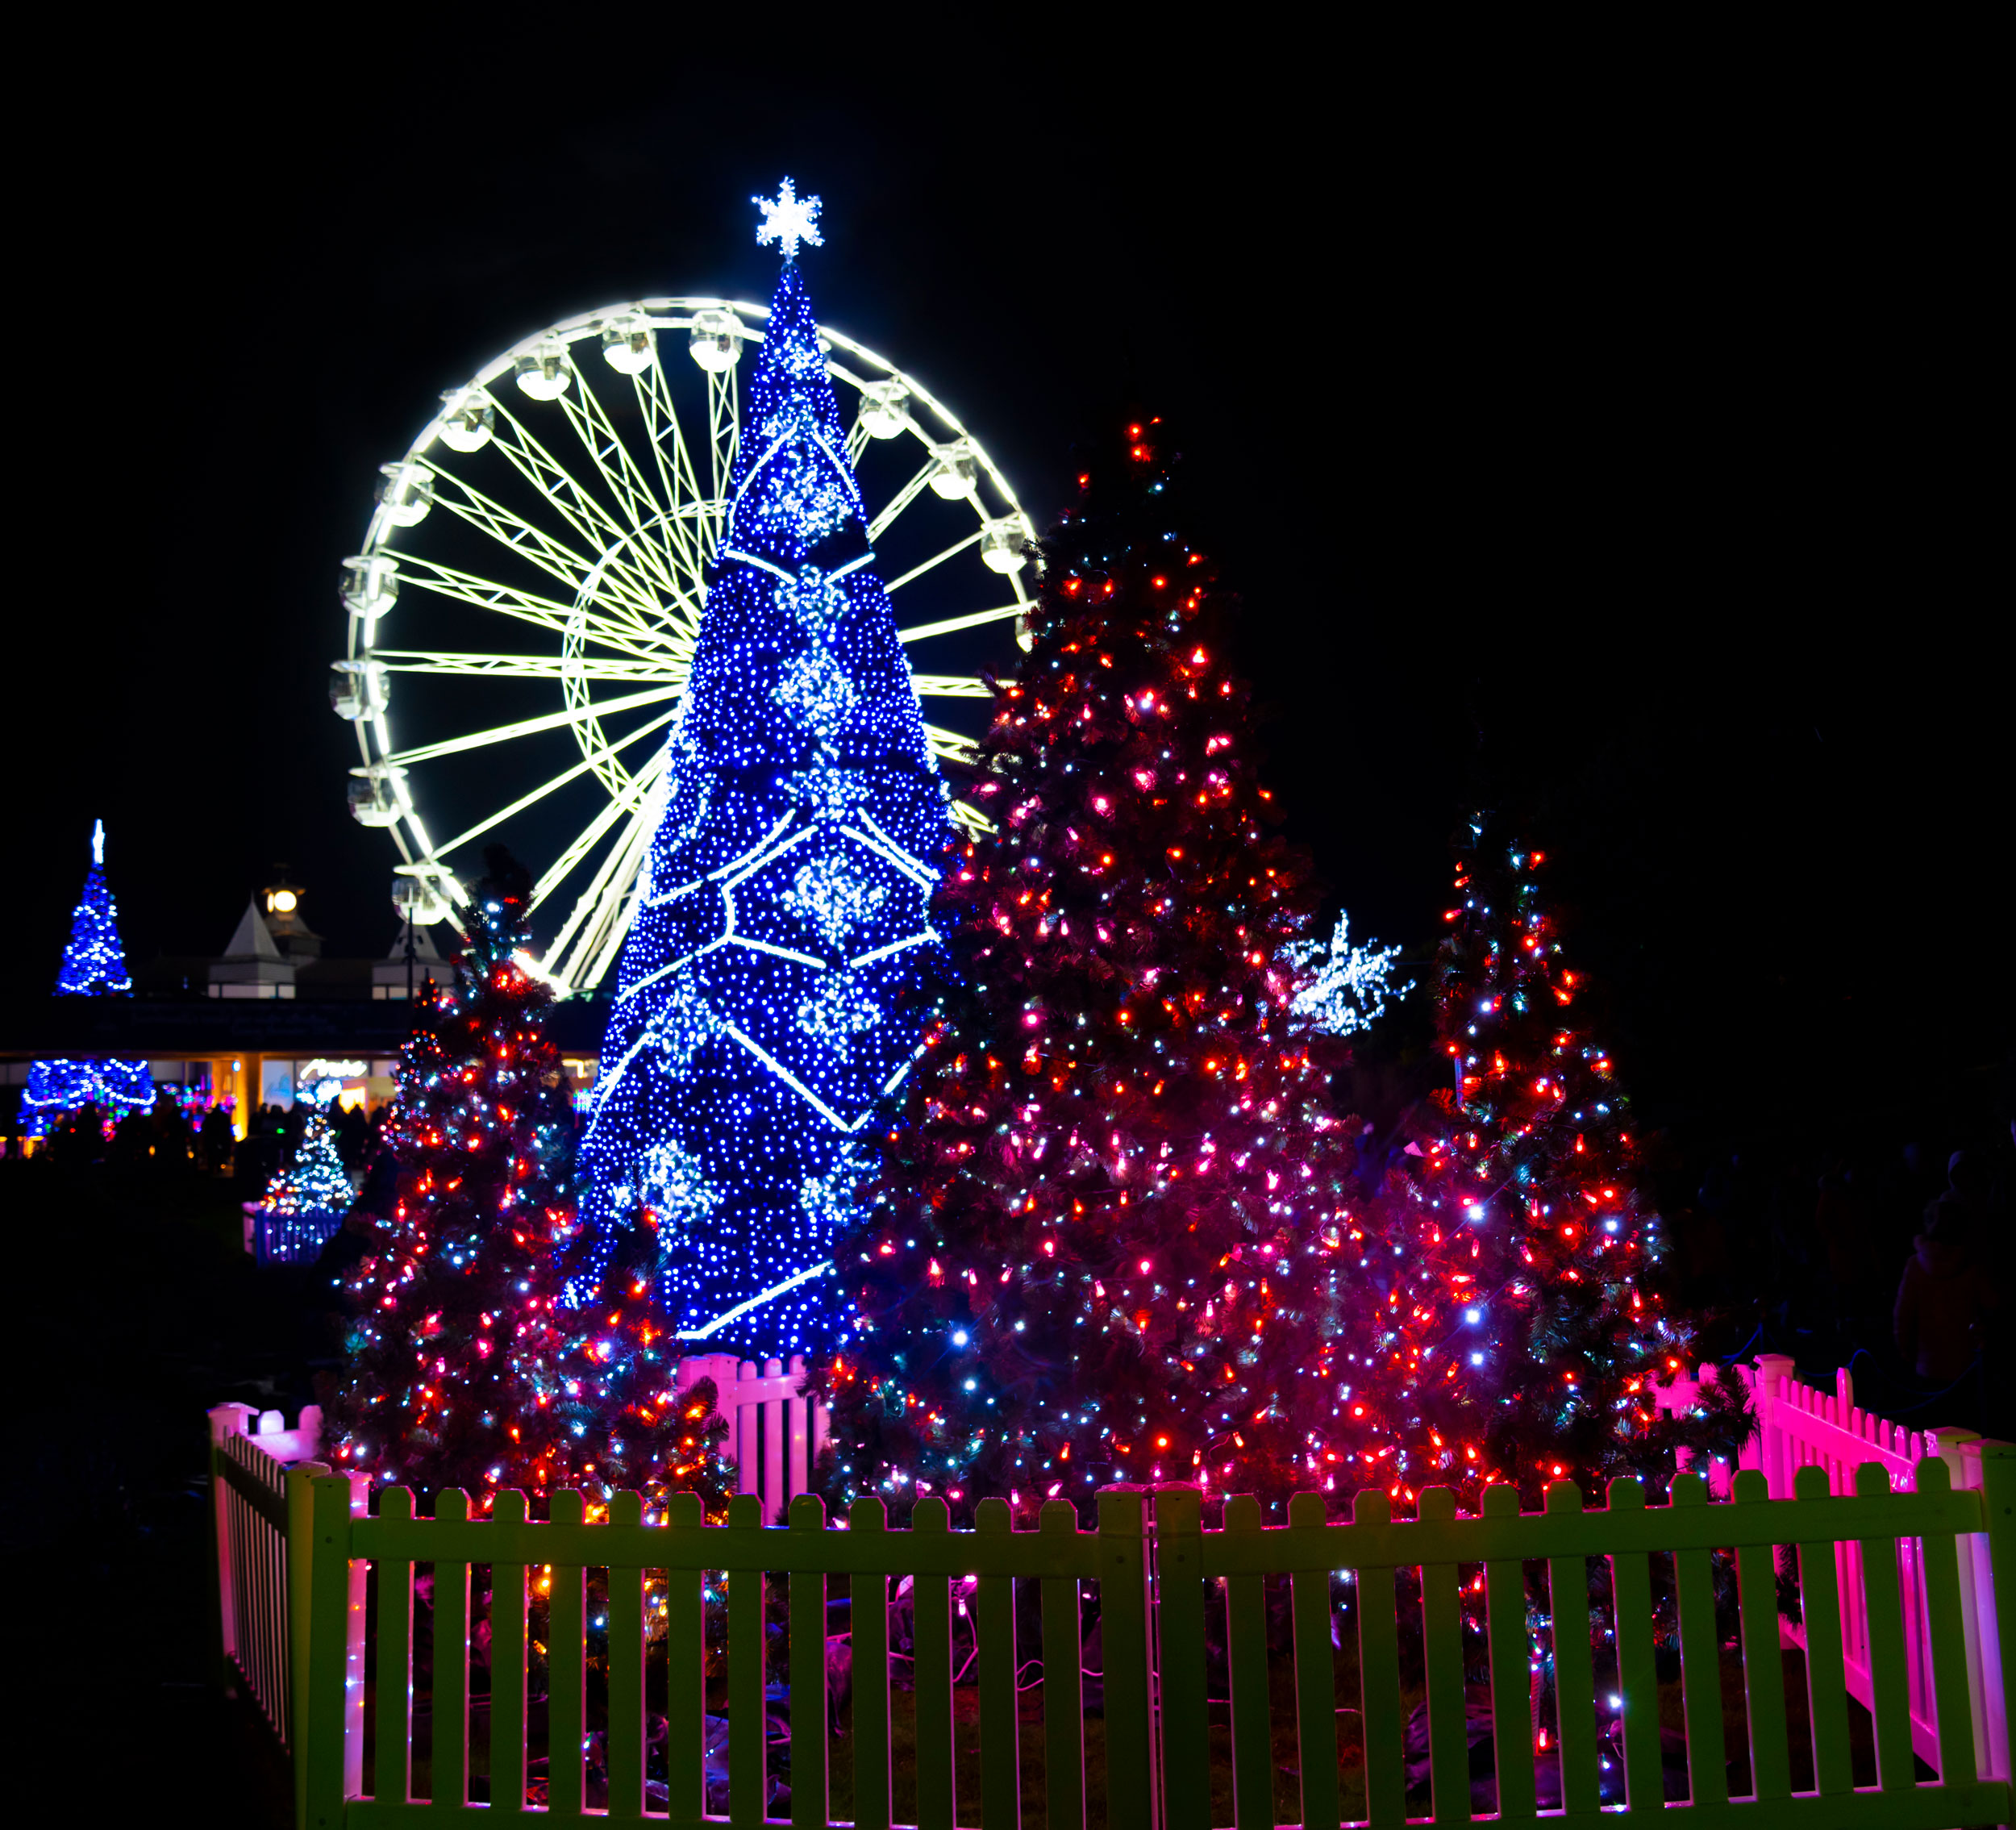 Dozens of illuminated Christmas trees line the streets and parks of Bournemouth